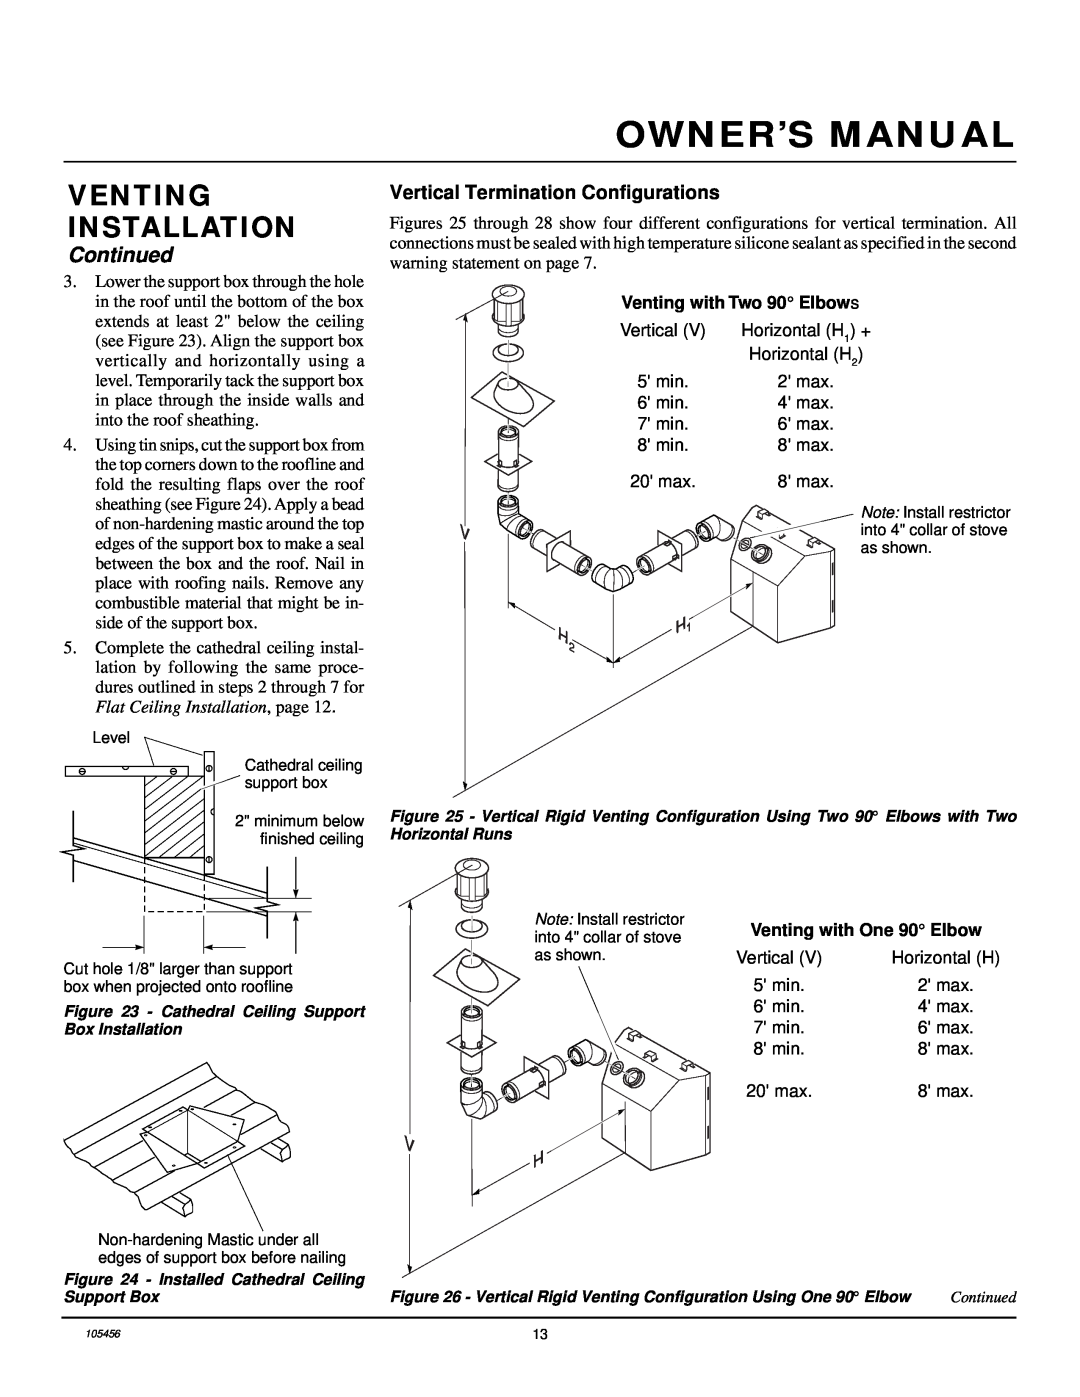 Desa CHDV34(N/P)(A) Vertical Termination Configurations, Owner’S Manual, Venting Installation, Continued 